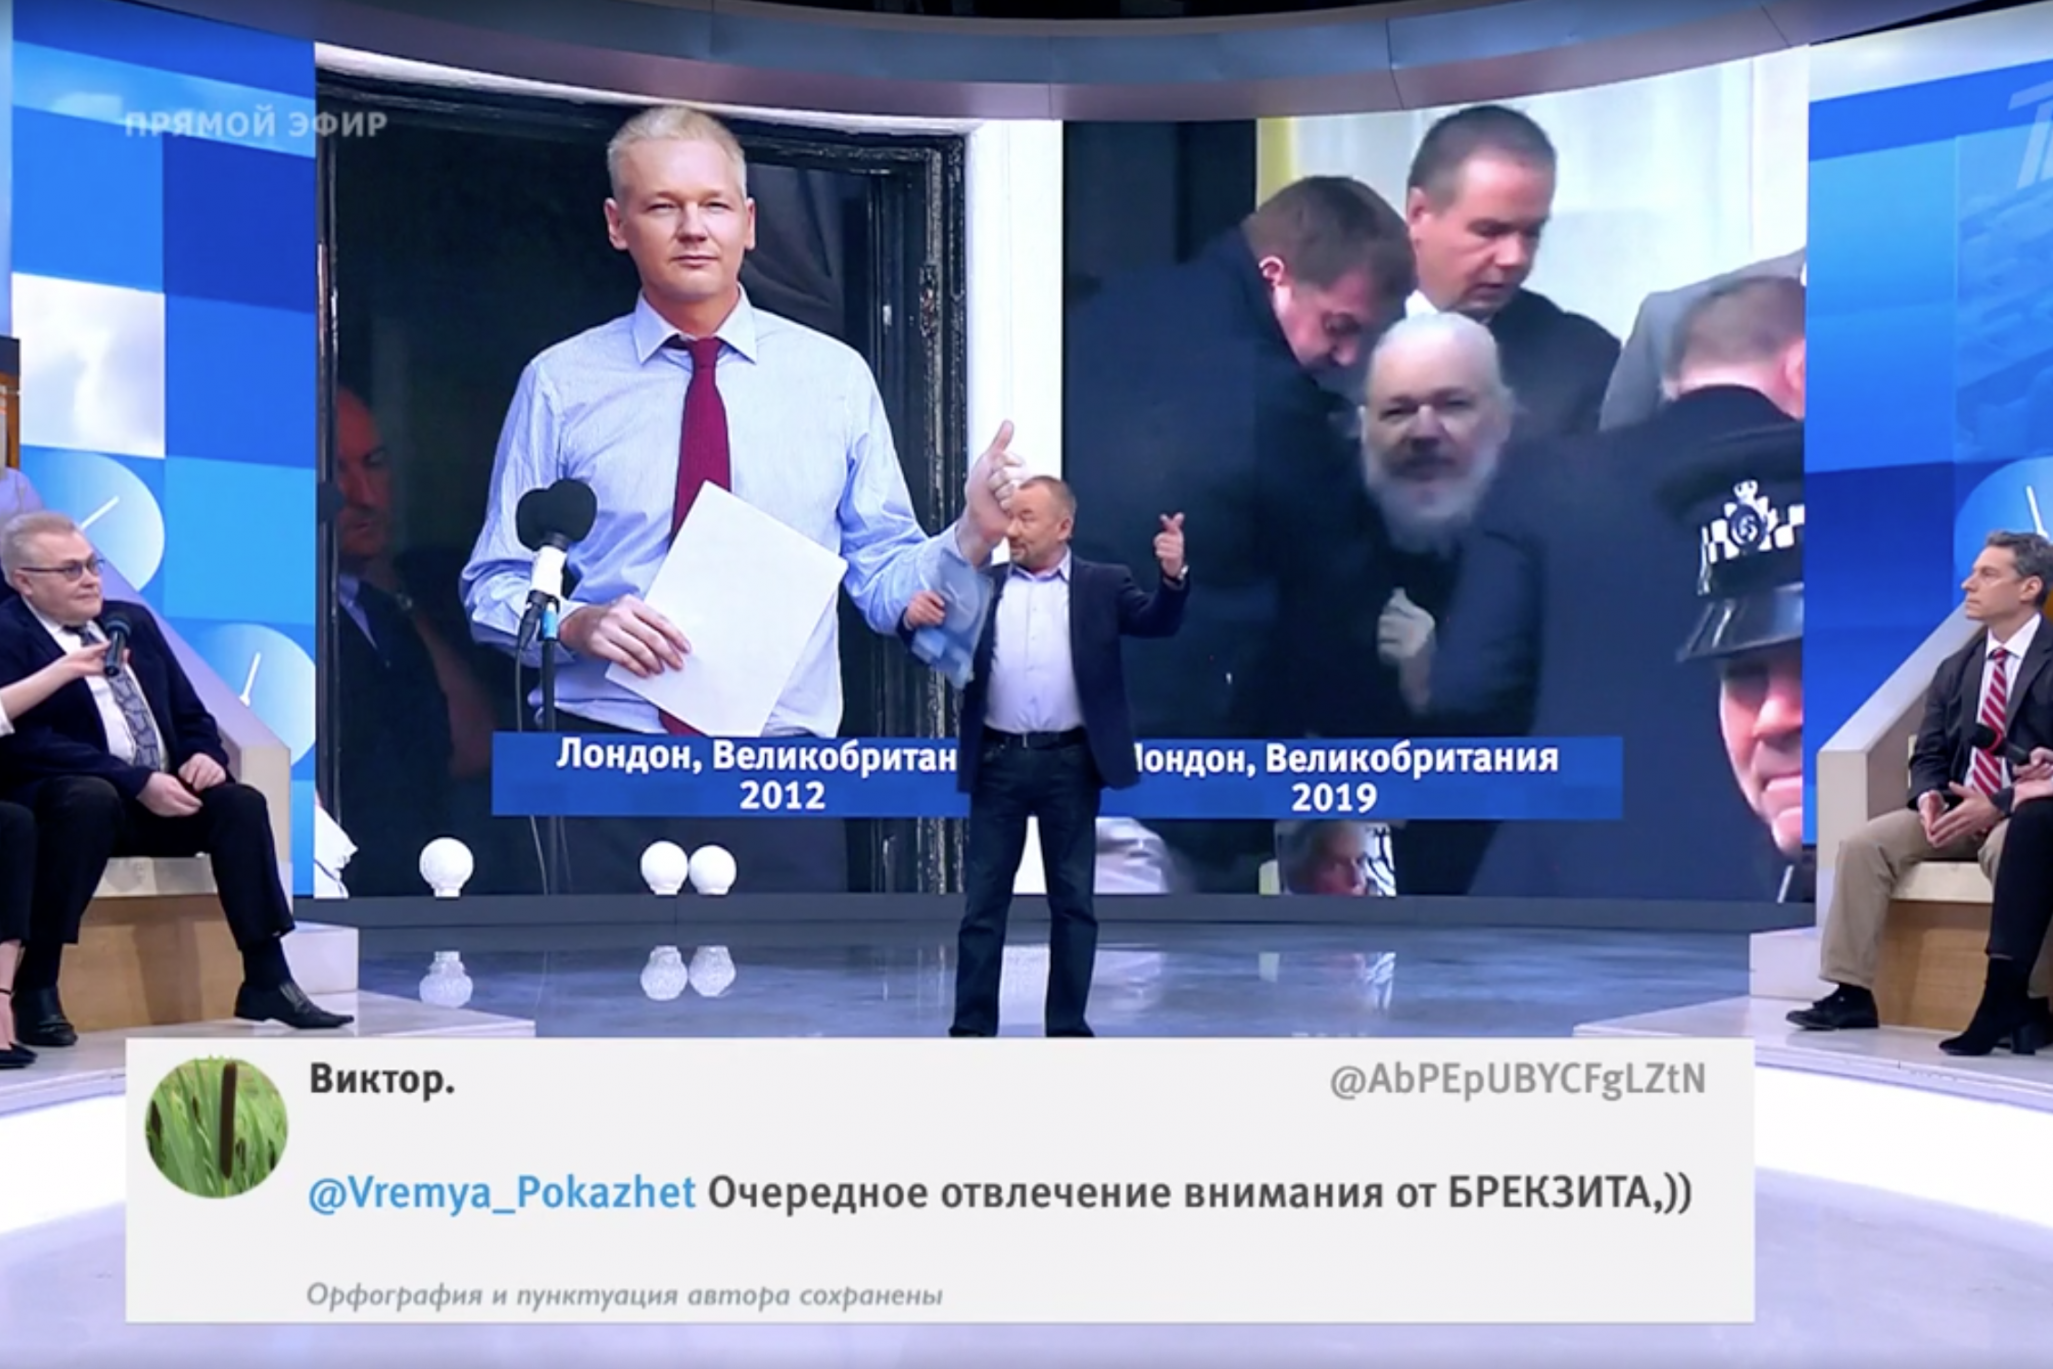 Russian TV has described the arrest of Julian Assange as a "personal and political tragedy"